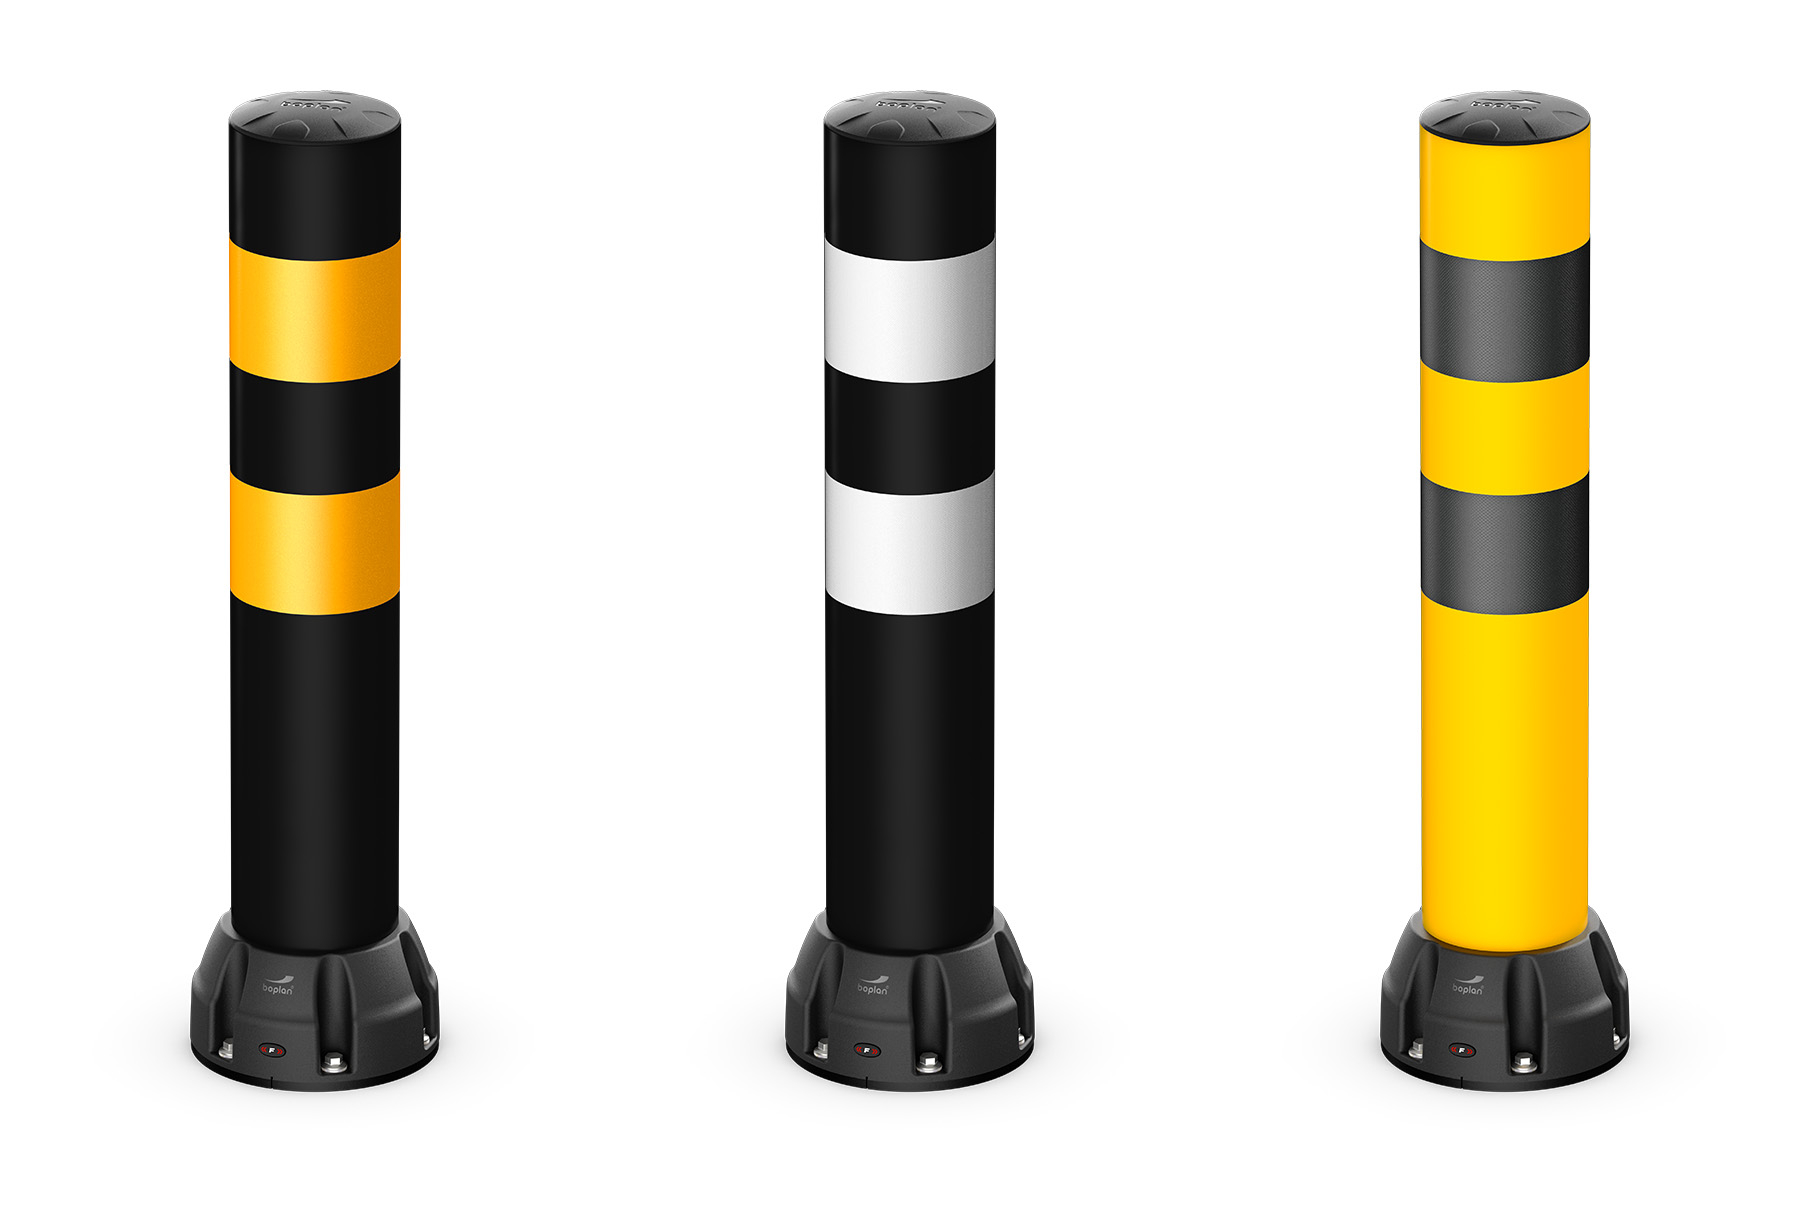 Render of a set of Boplan BO200F bollards in different color options